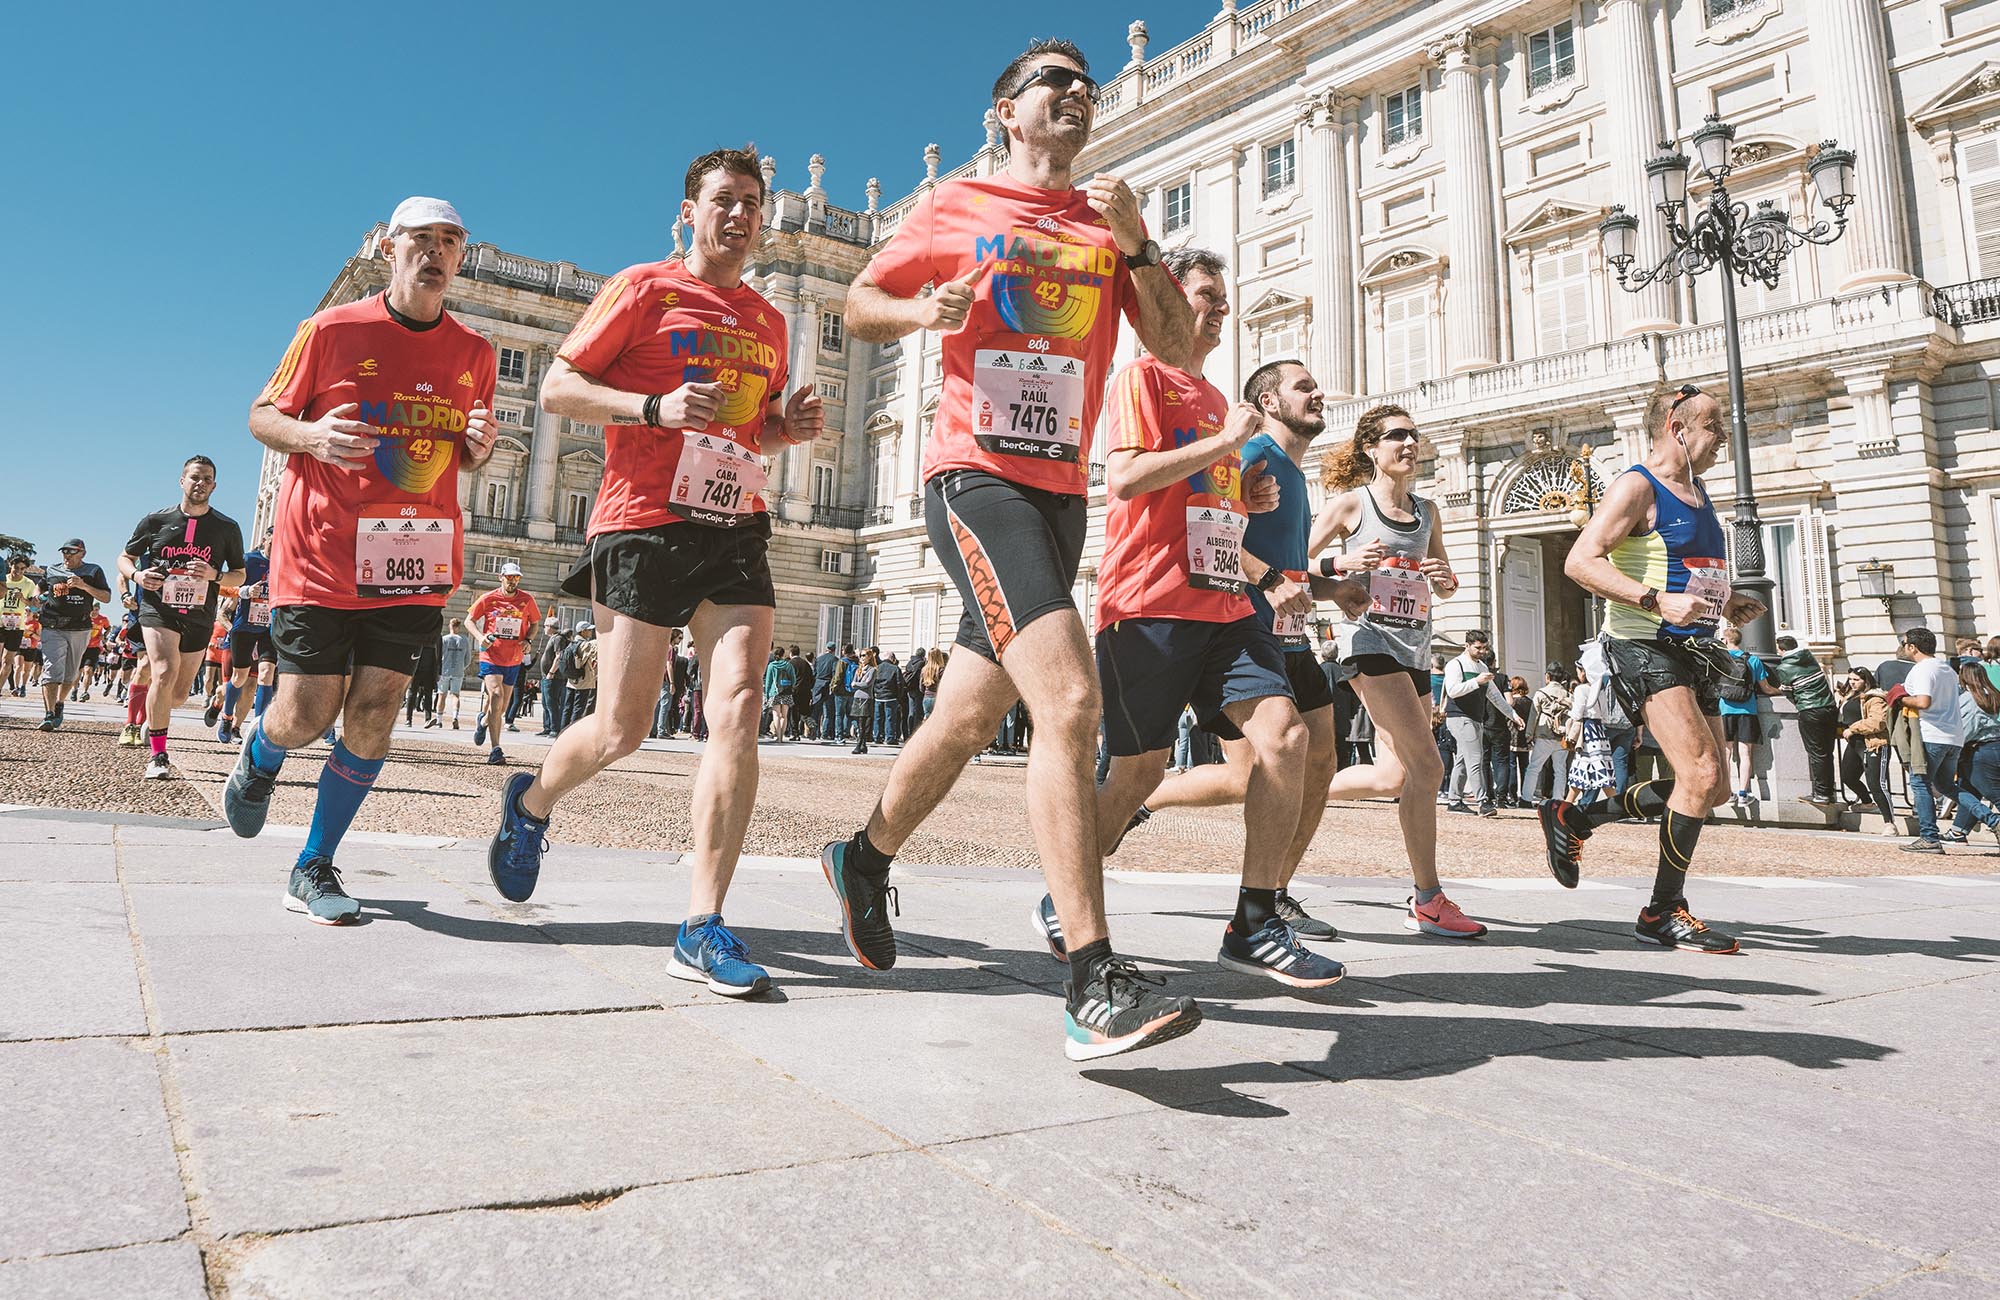 The EDP Rock ‘n’ Roll Running Series Madrid opens registrations for 2021 on Monday, November 23th